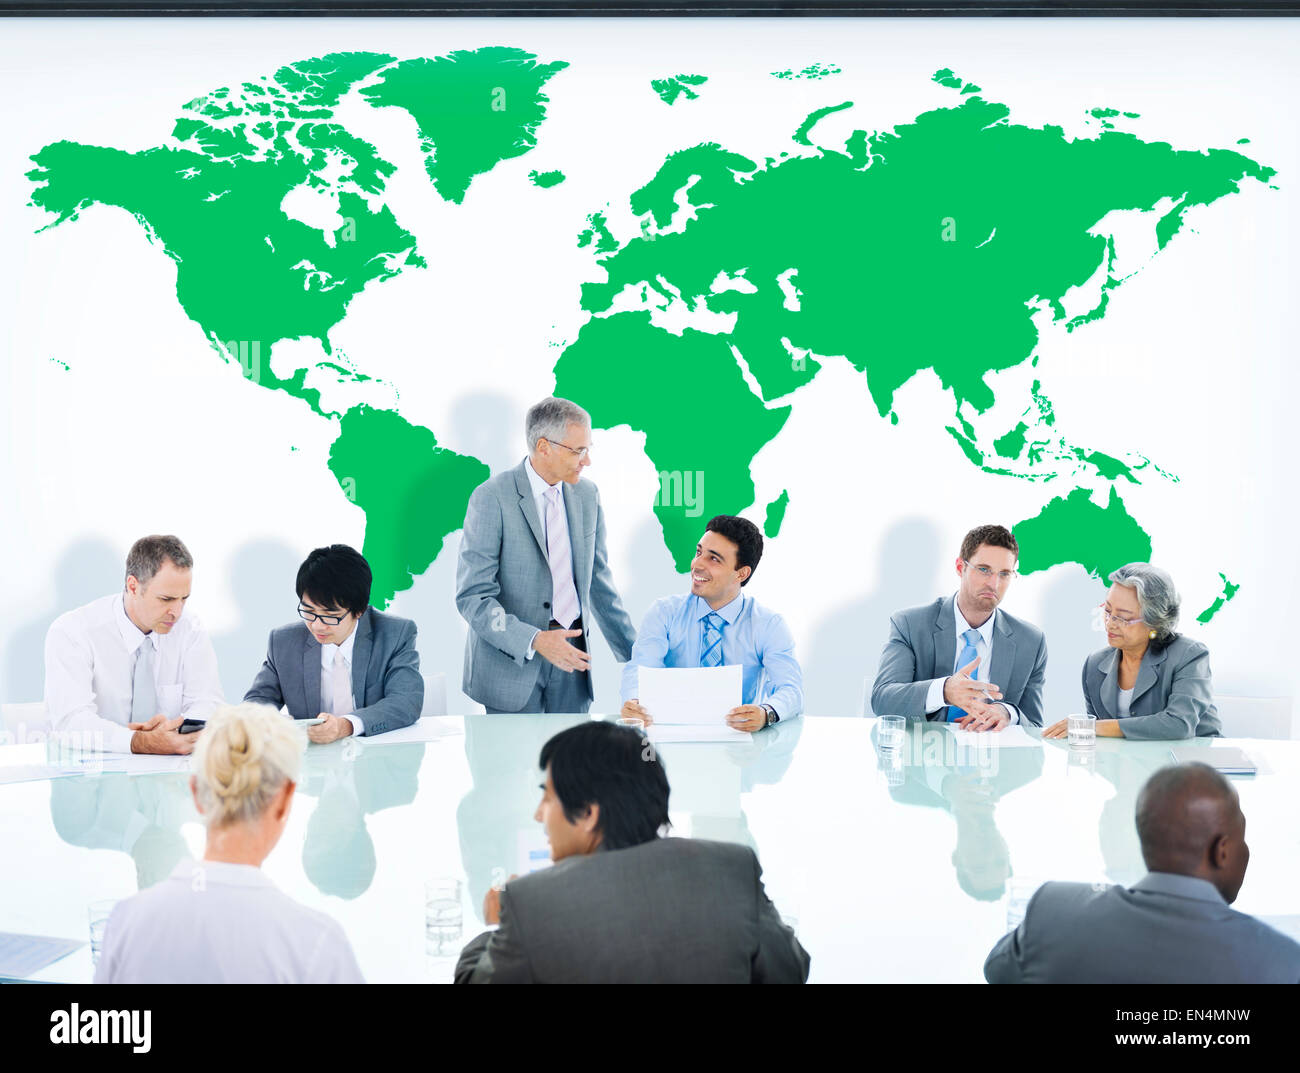 Business People Having a Discussion and World Map Stock Photo